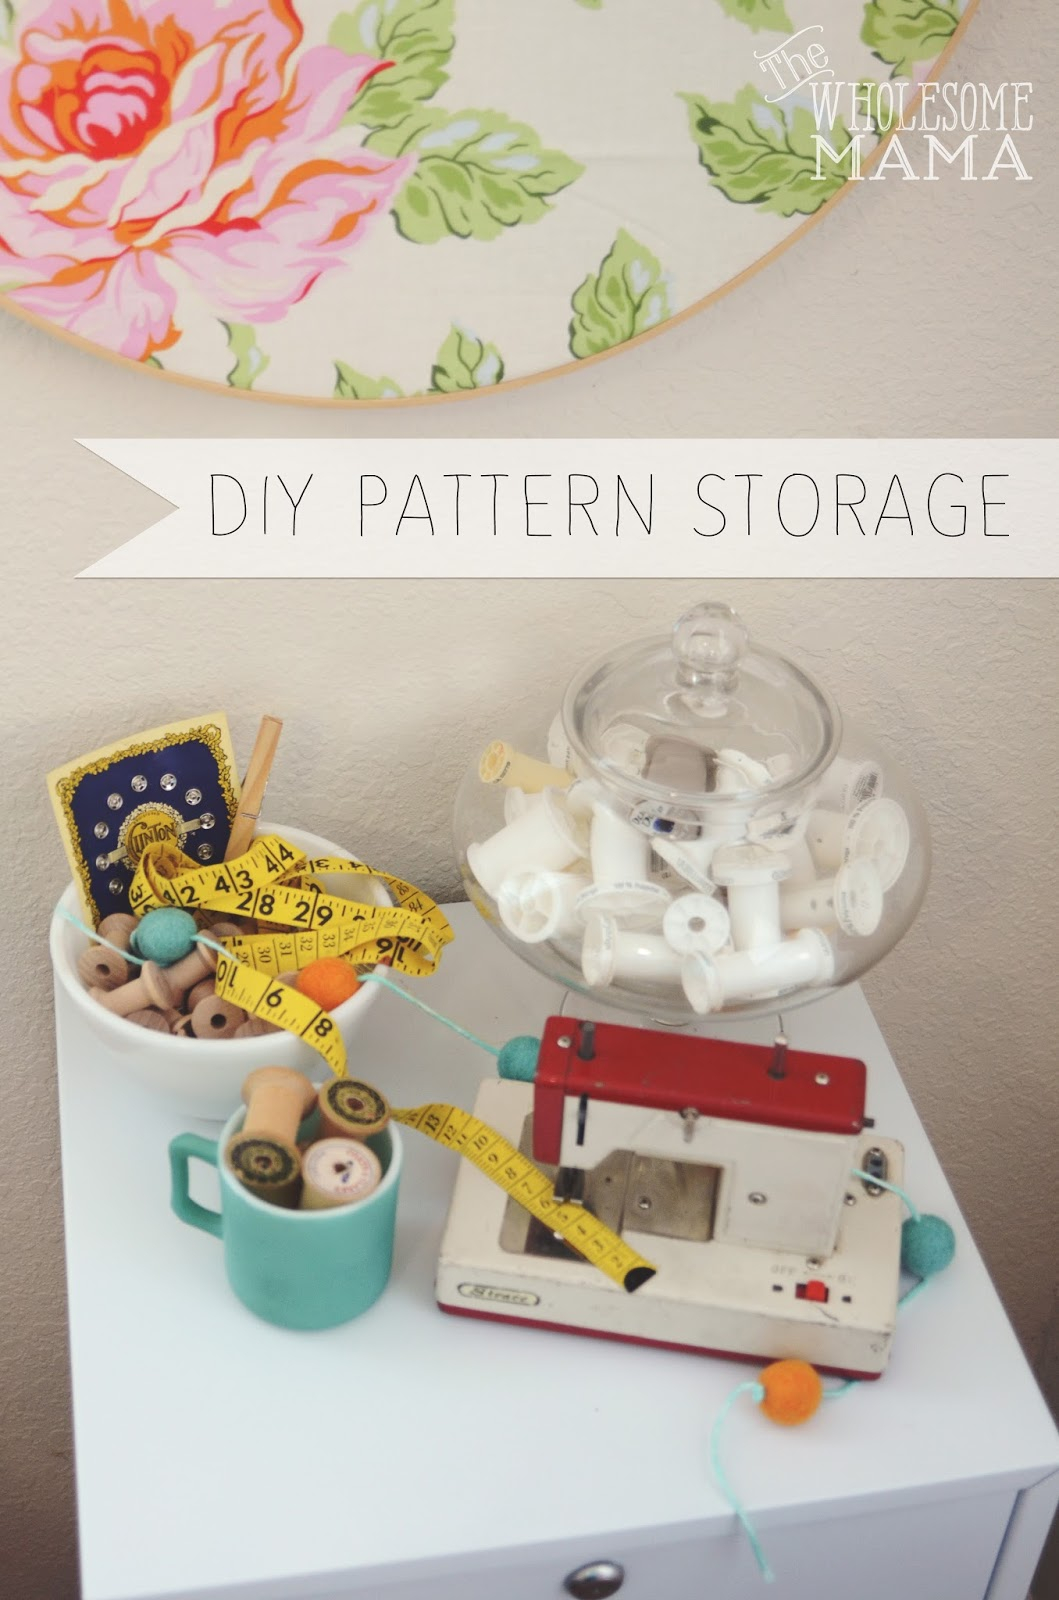 The Wholesome Mama Diy Pattern Storage Filing Cabinet Makeover in dimensions 1059 X 1600